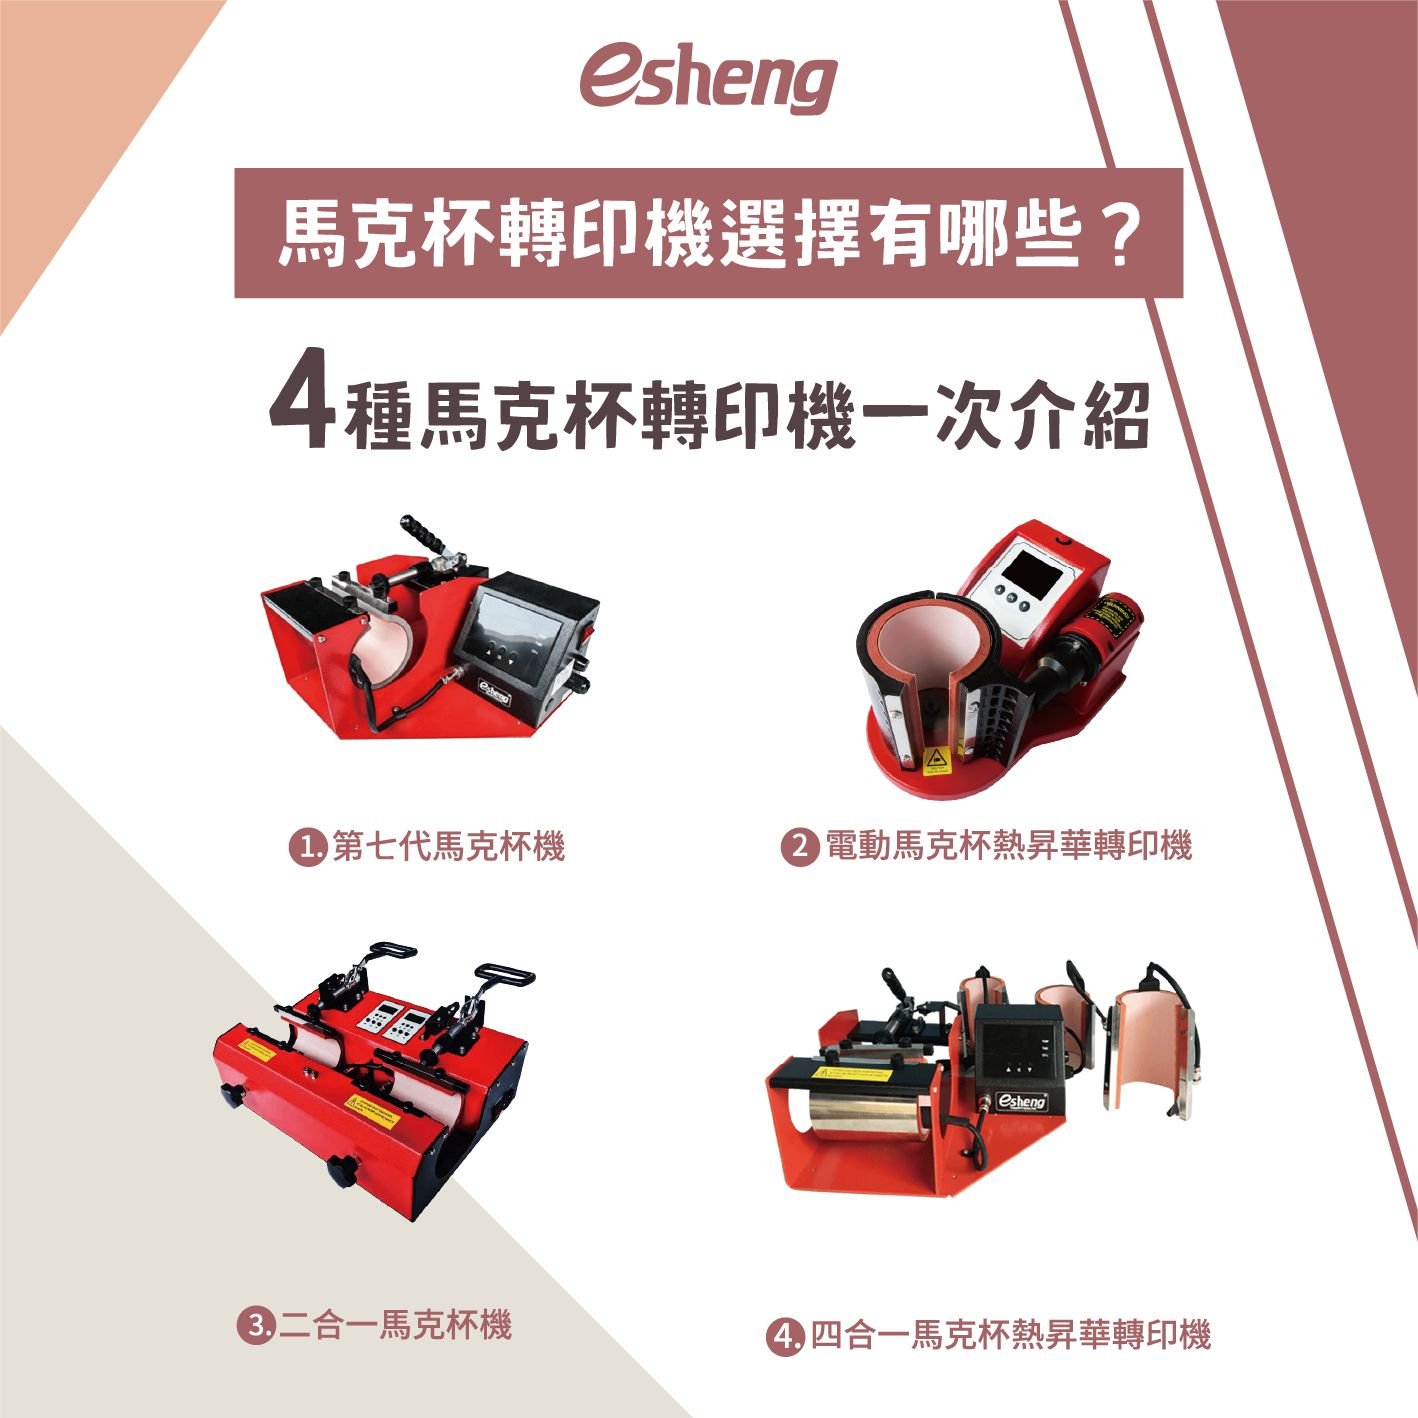 ariety of heat transfer equipment according to your needs